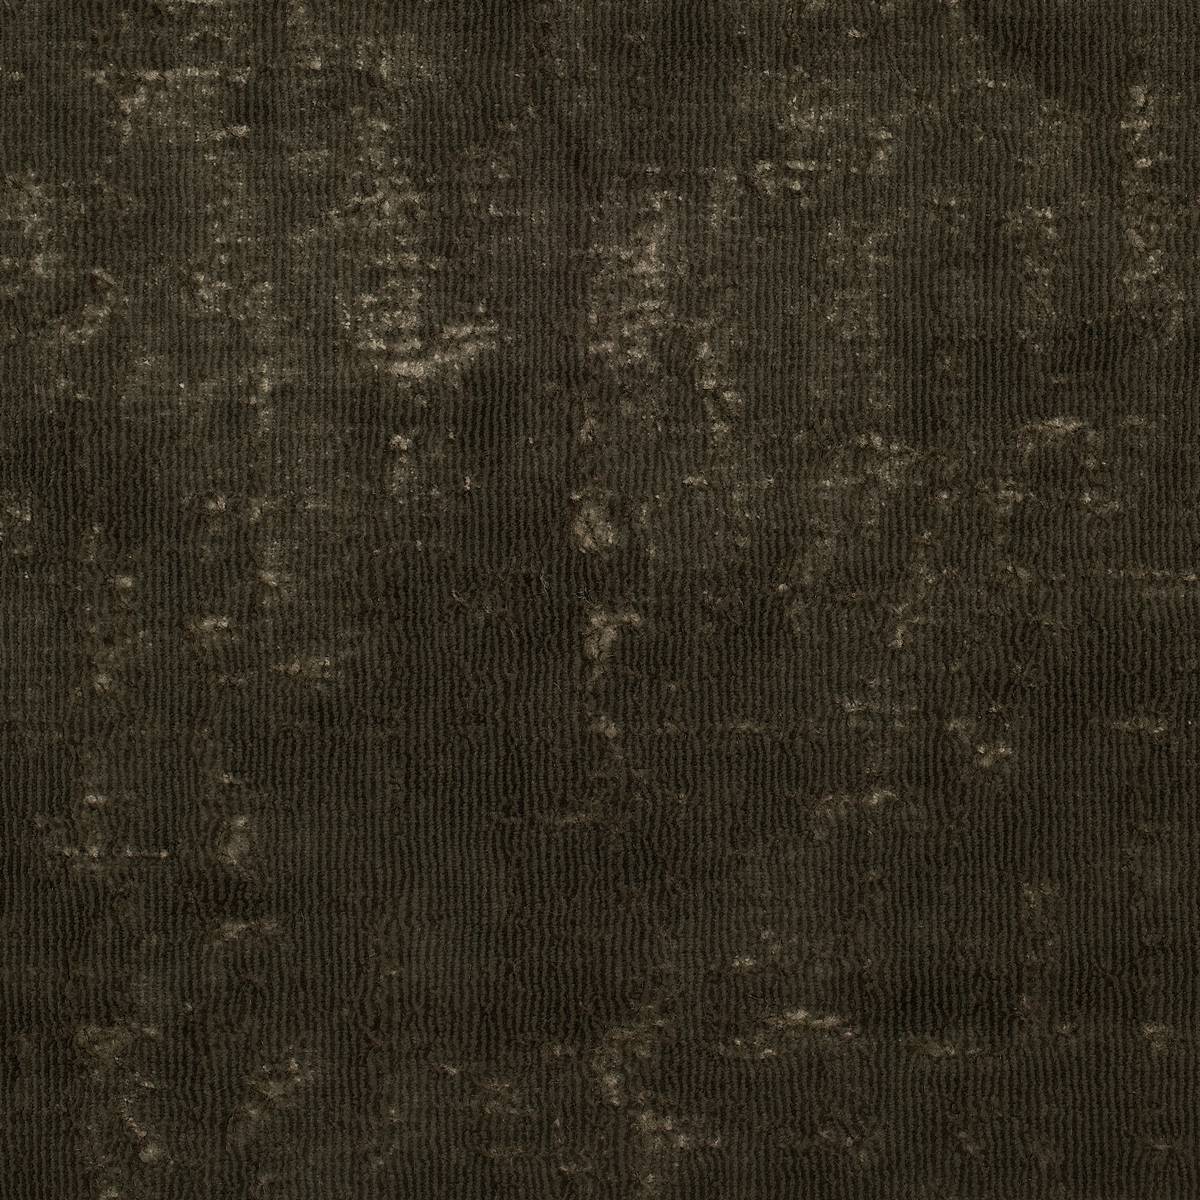 Curzon Chocolate Fabric by Zoffany